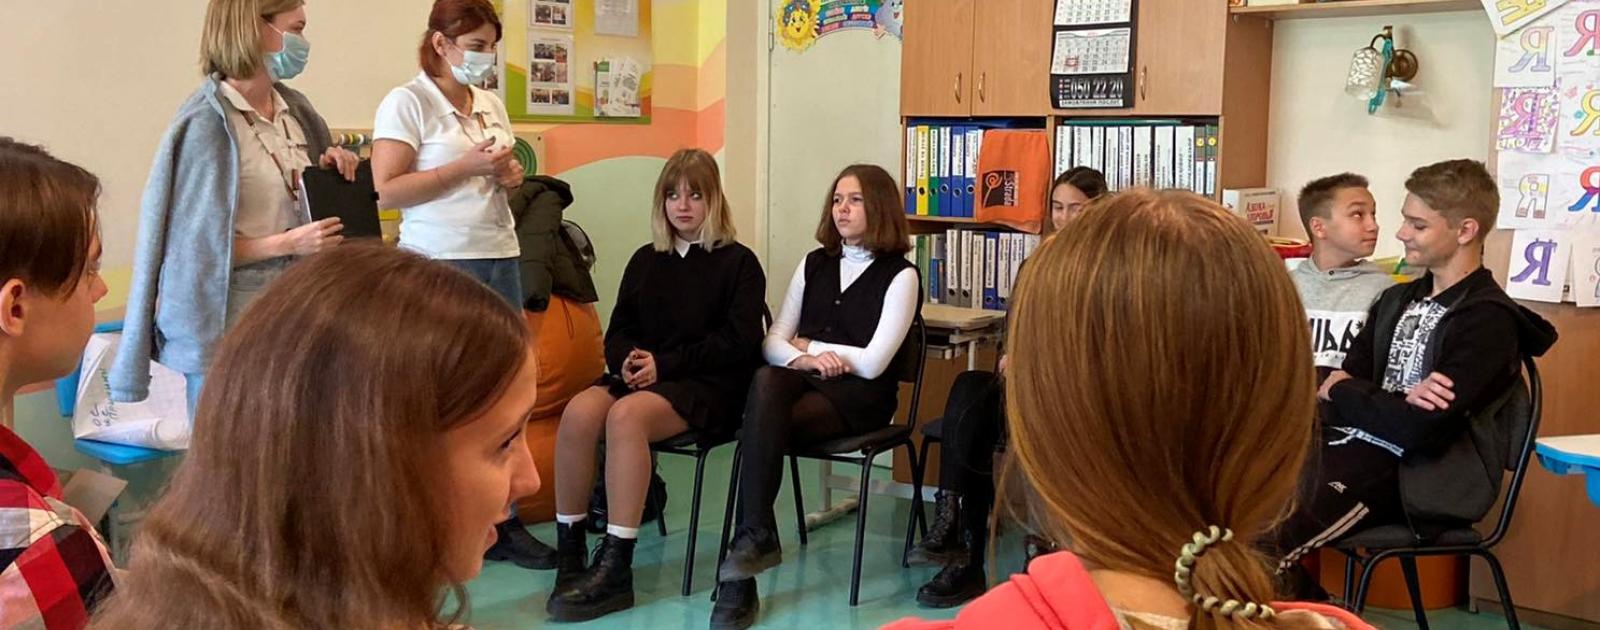 Pupils and teachers of five schools in eastern Ukraine took part in a study aimed at combating gender-based violence in schools